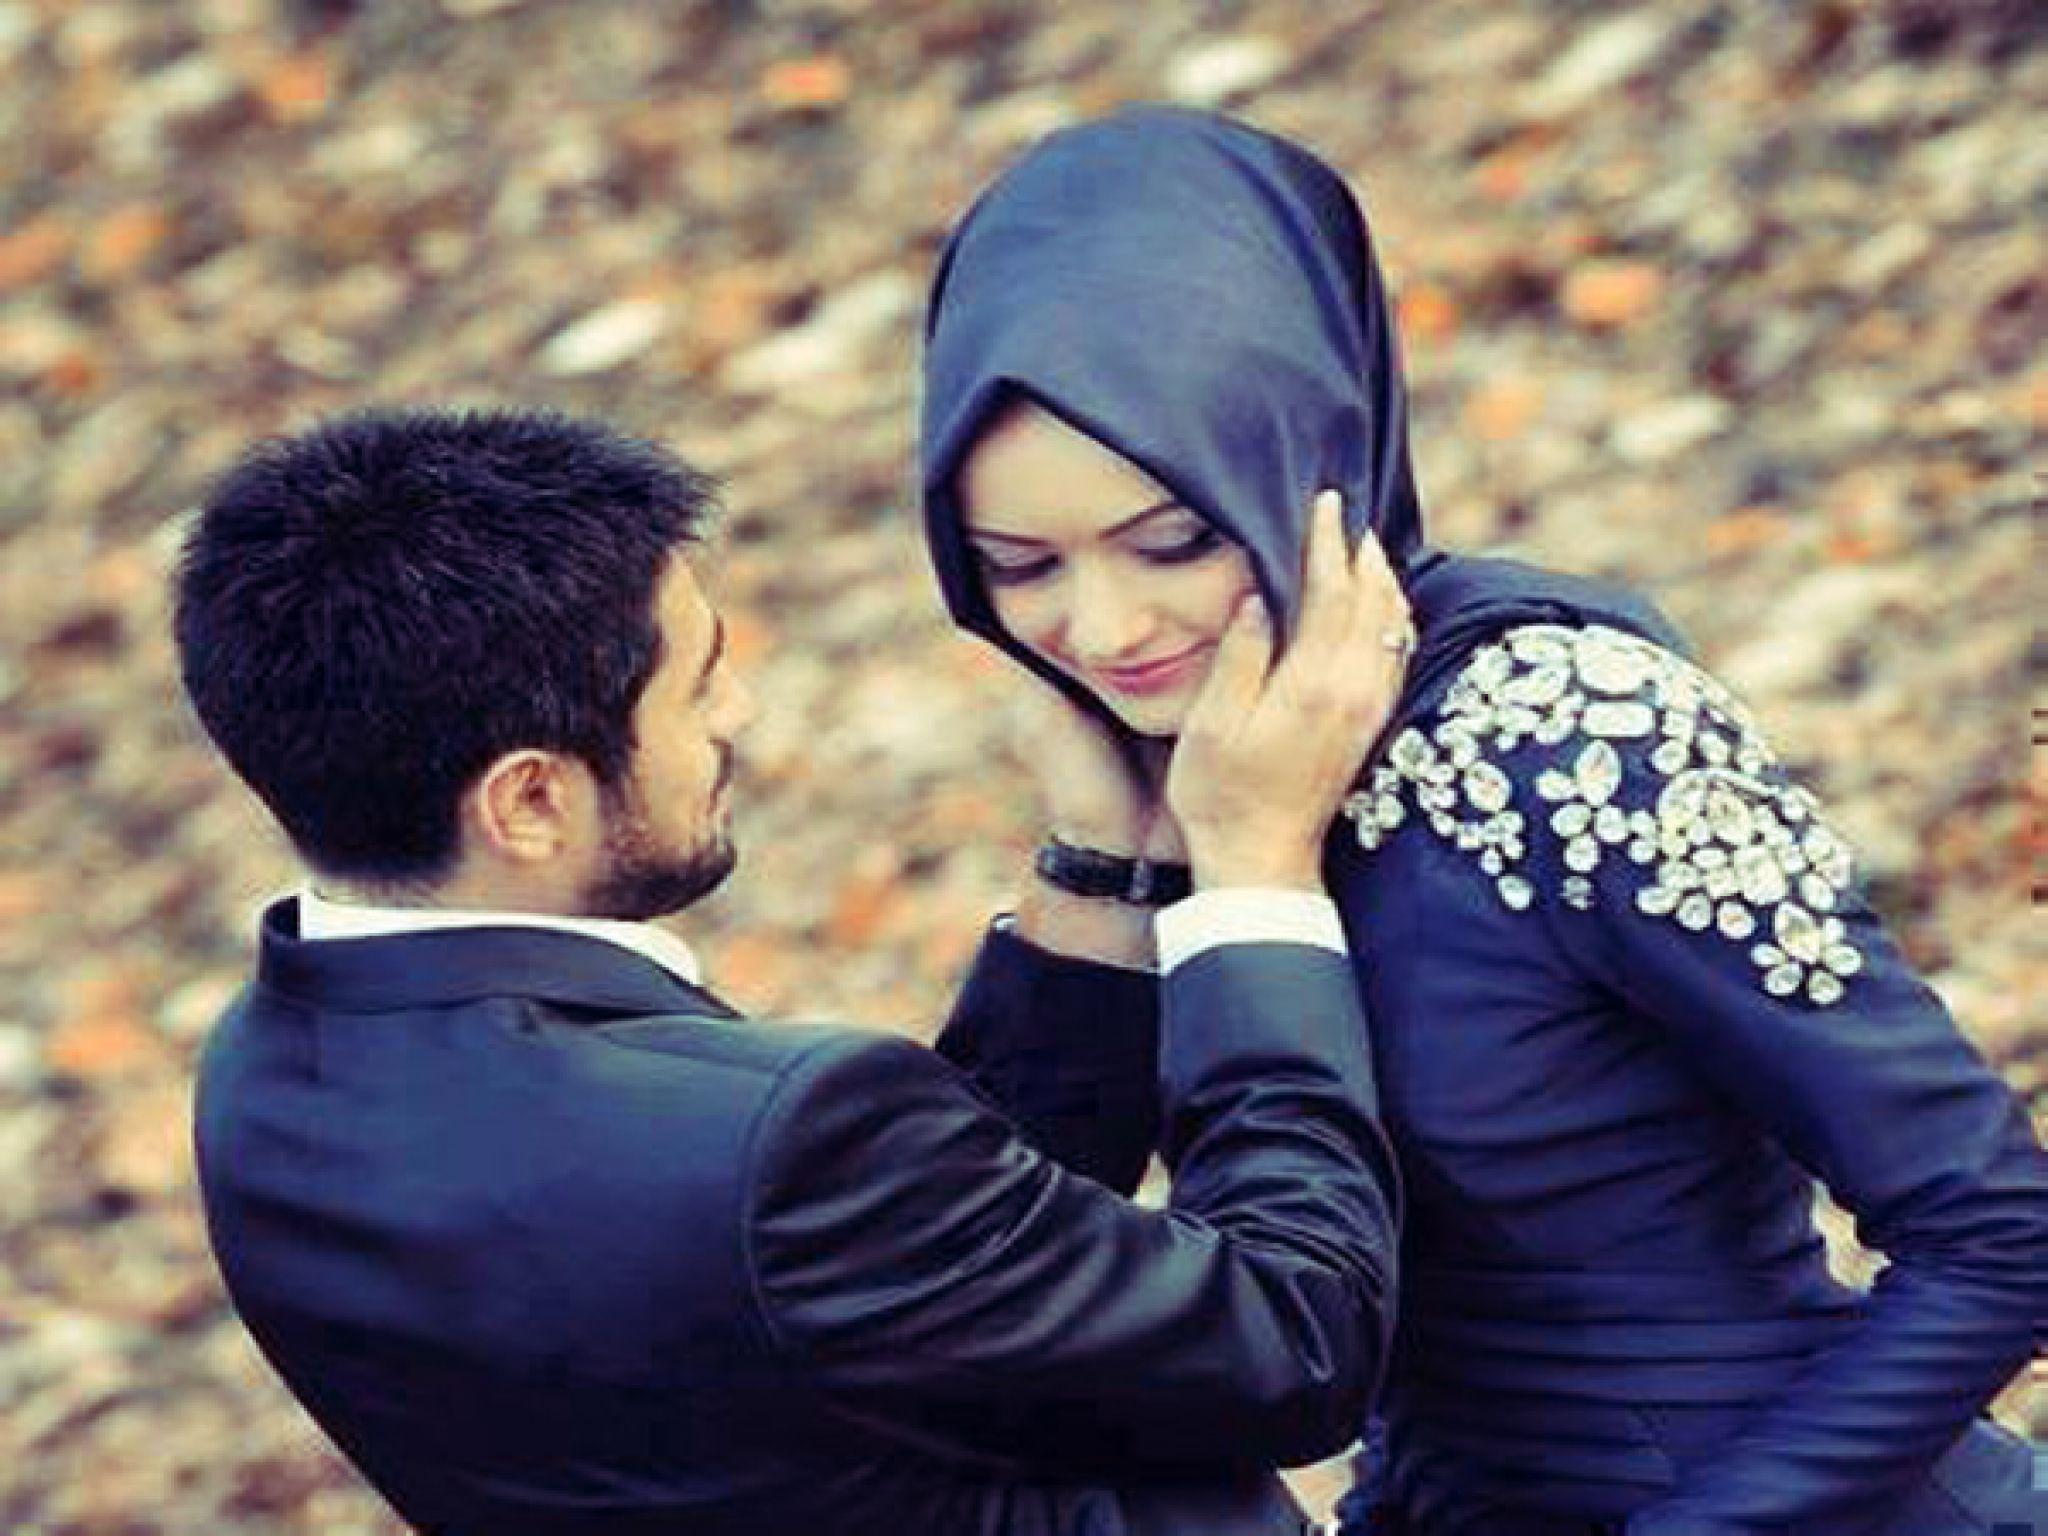 Marriage romance in islam after Love and